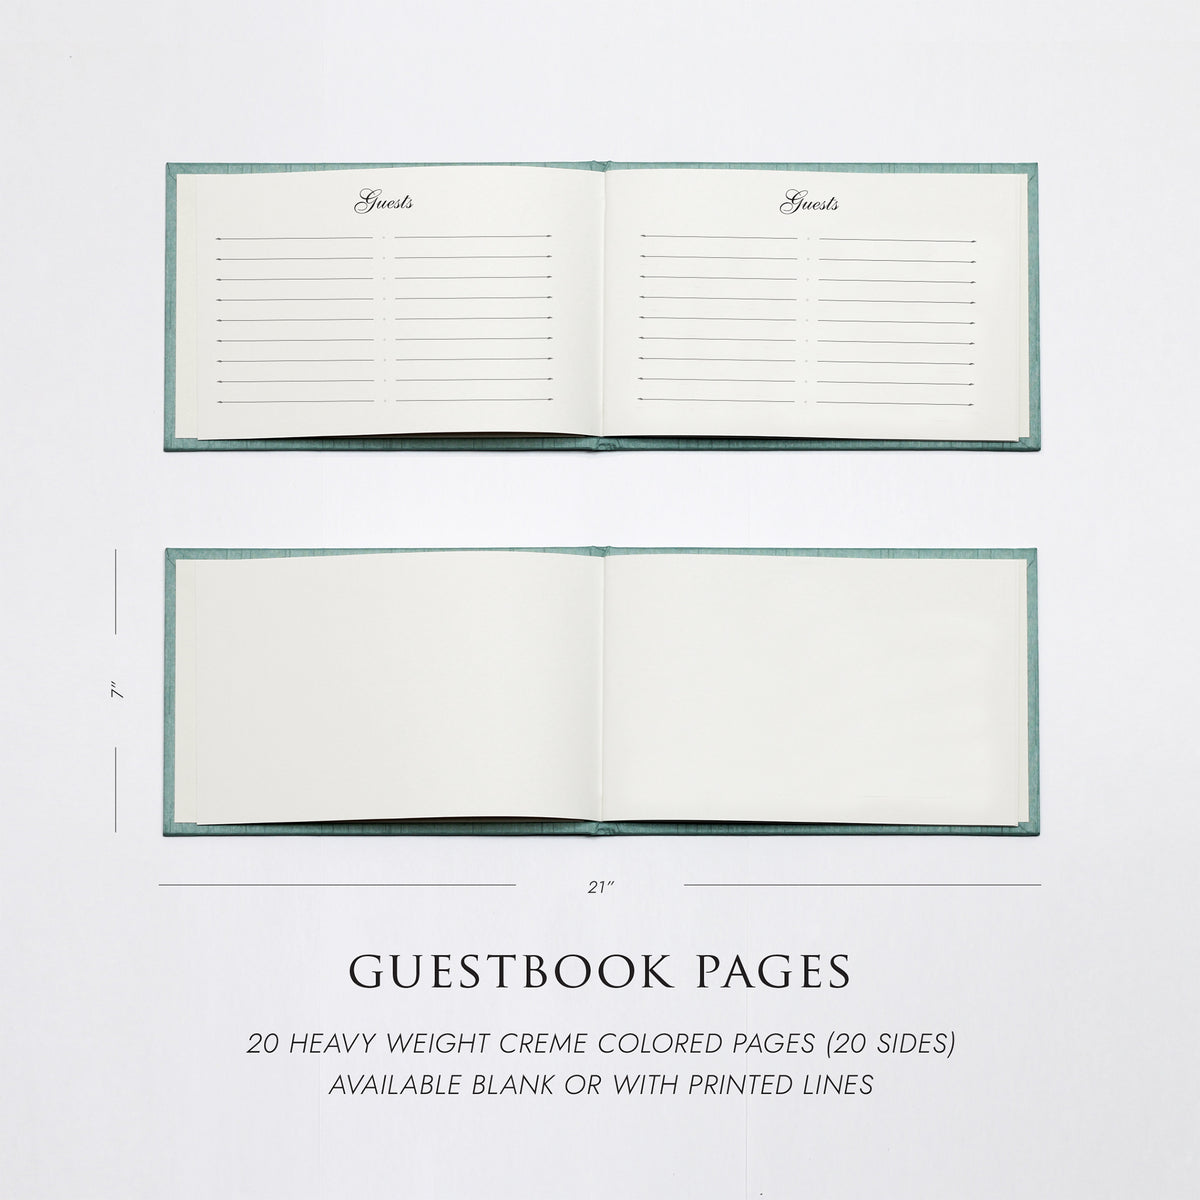 Guestbook Embossed with “Guests” | Cover: Teal Blue Silk | Available Personalized